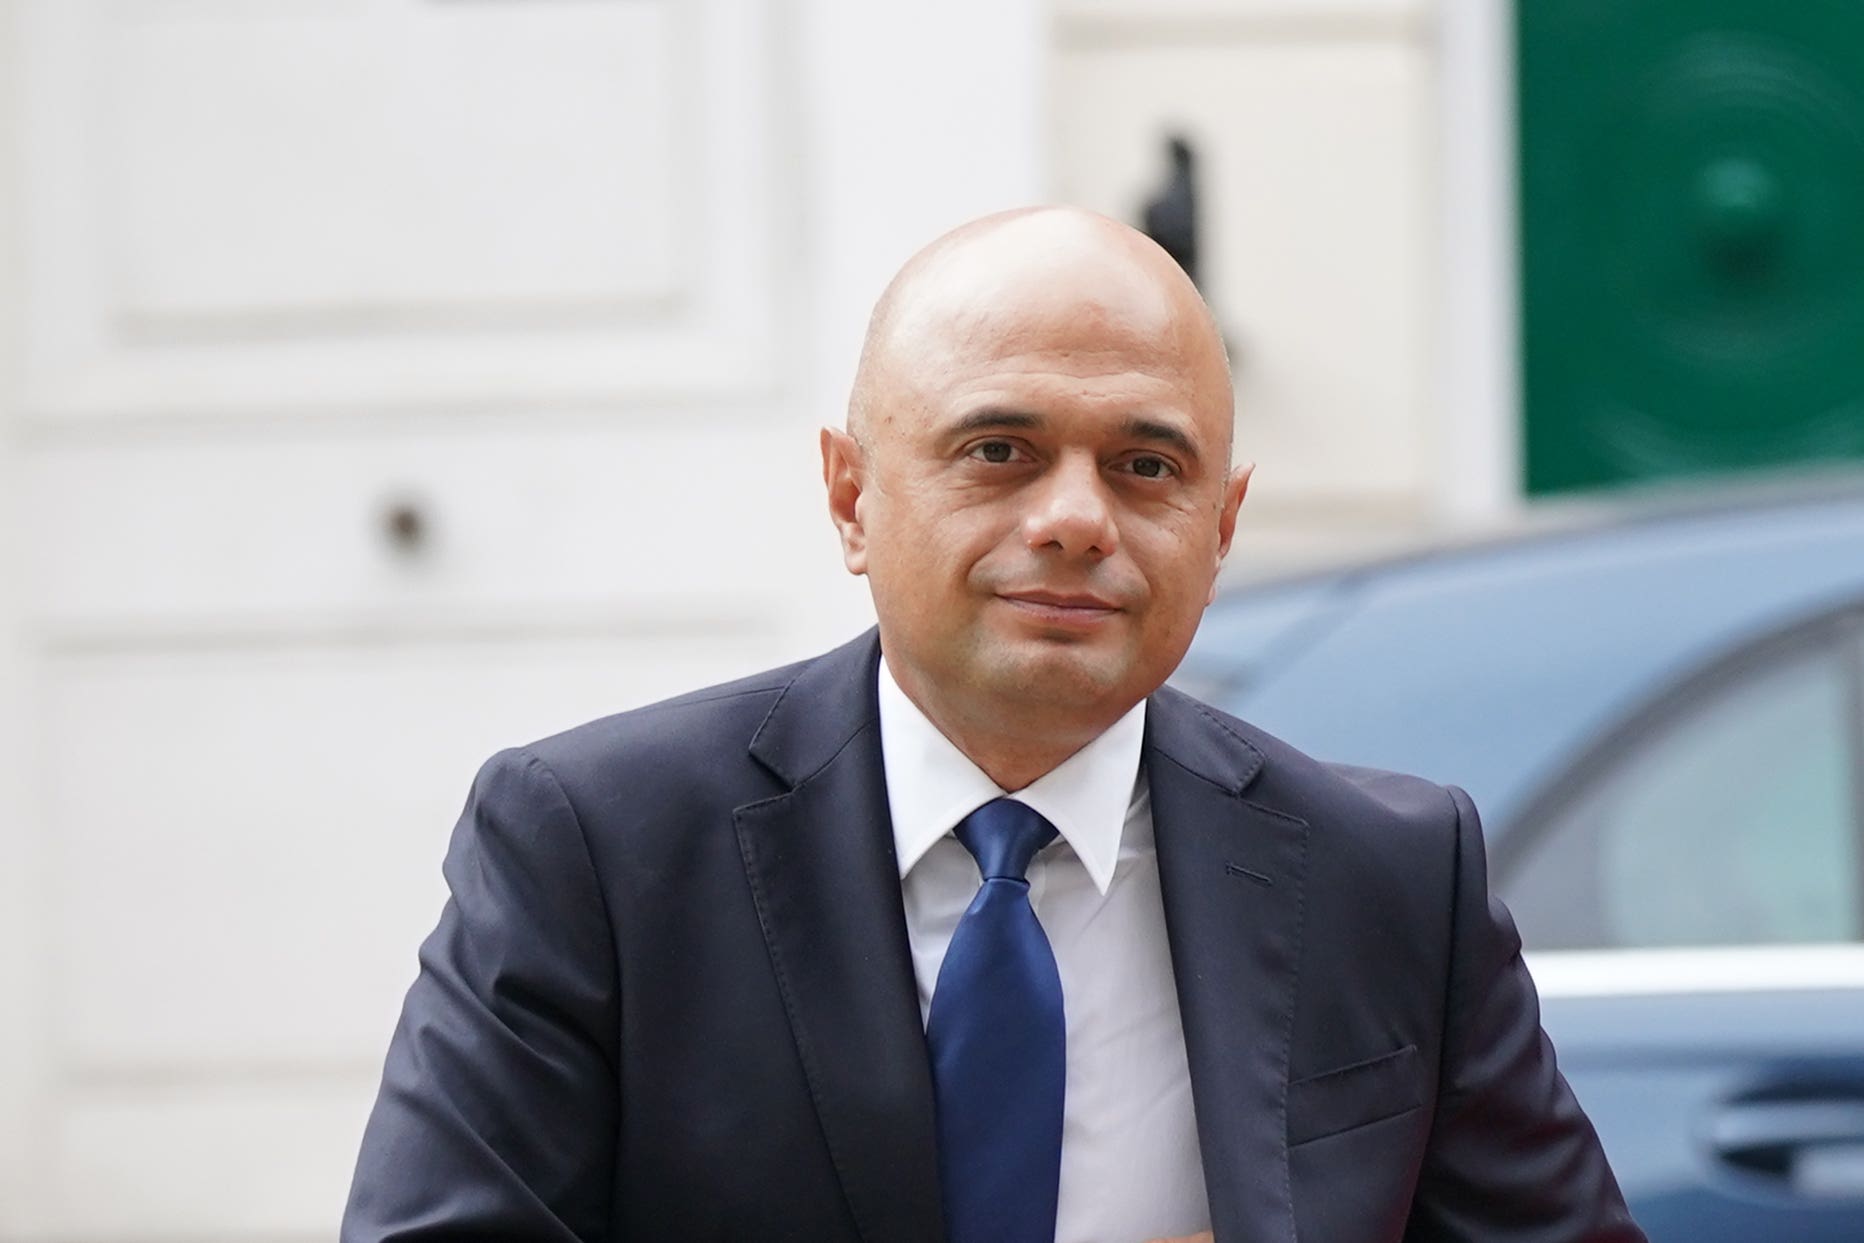 Javid says a royal commission into the health service is needed to ‘make sure the NHS is here in another 75 years’